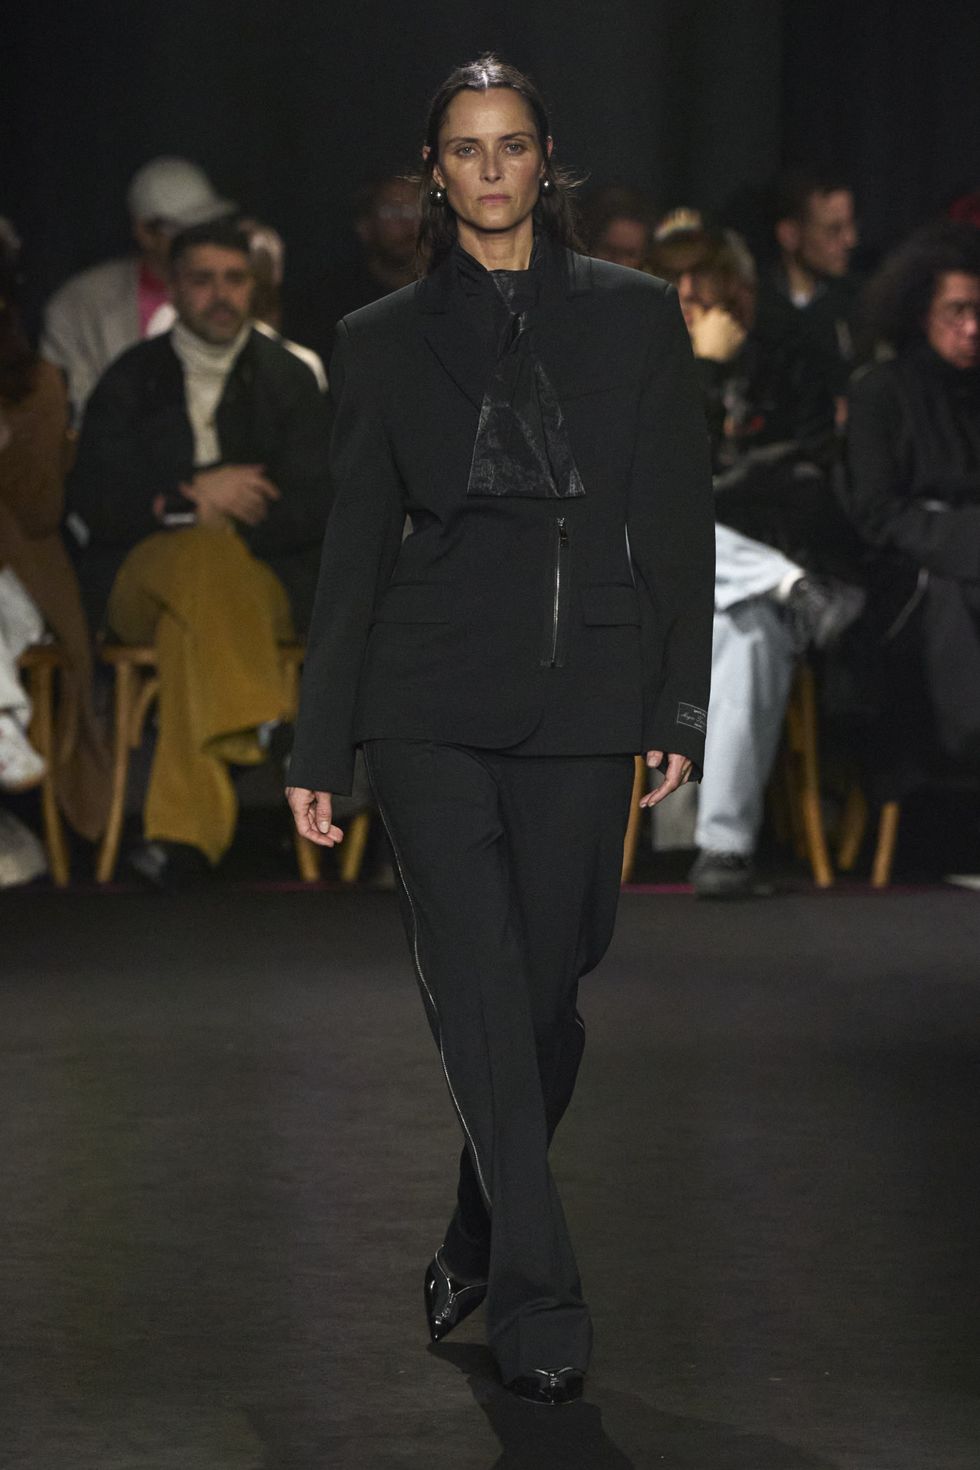 a person in a suit walking down a runway